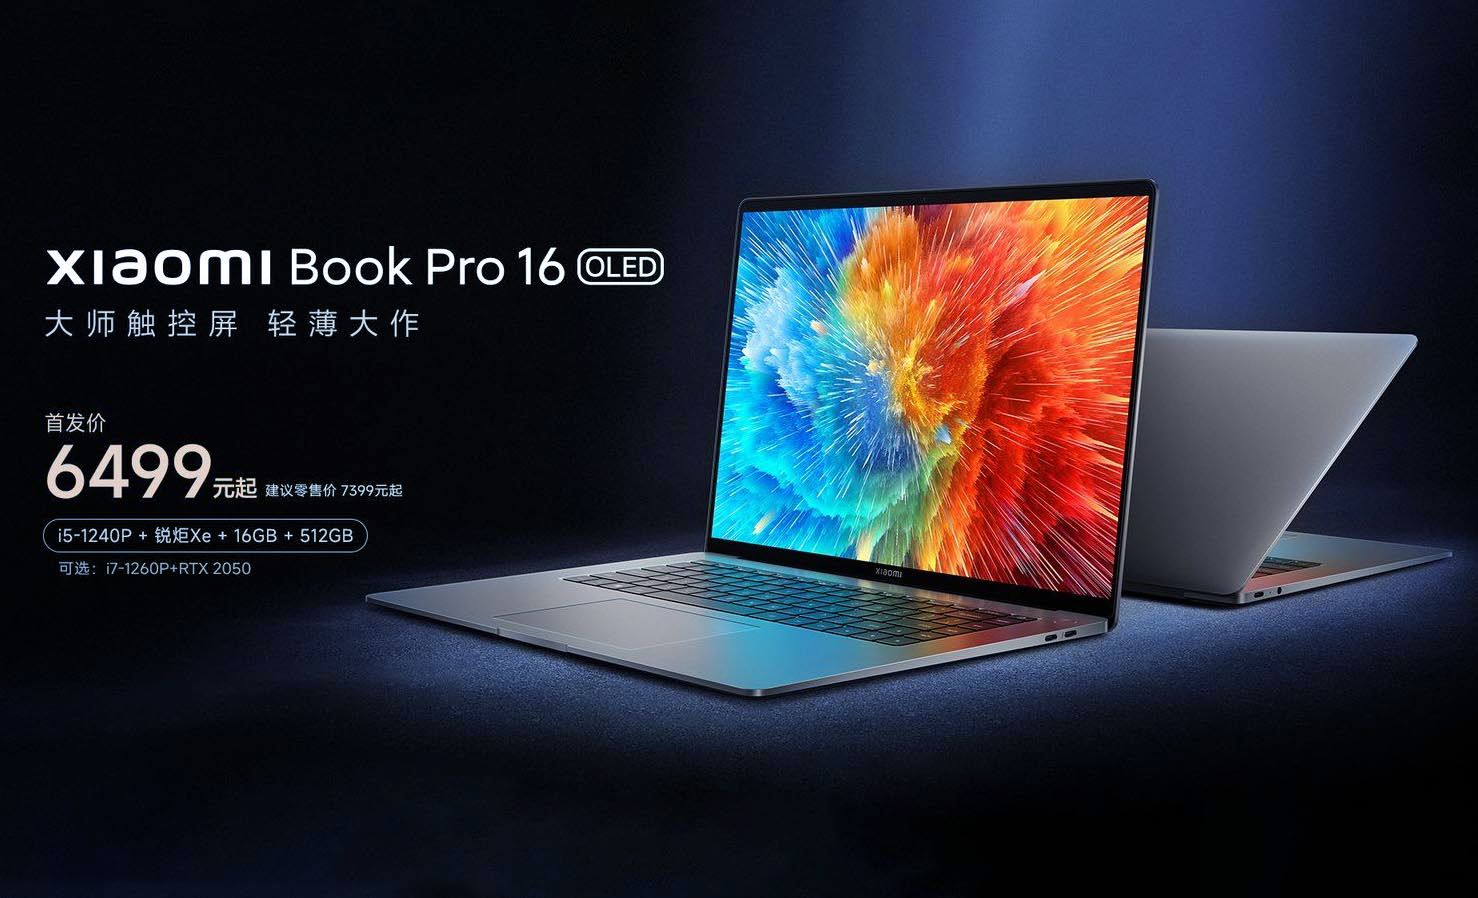 Xiaomi launches 2022 Book Pro laptops featuring up to 4K OLED display, Intel Core i5-1240P CPU and RTX 2050 GPU